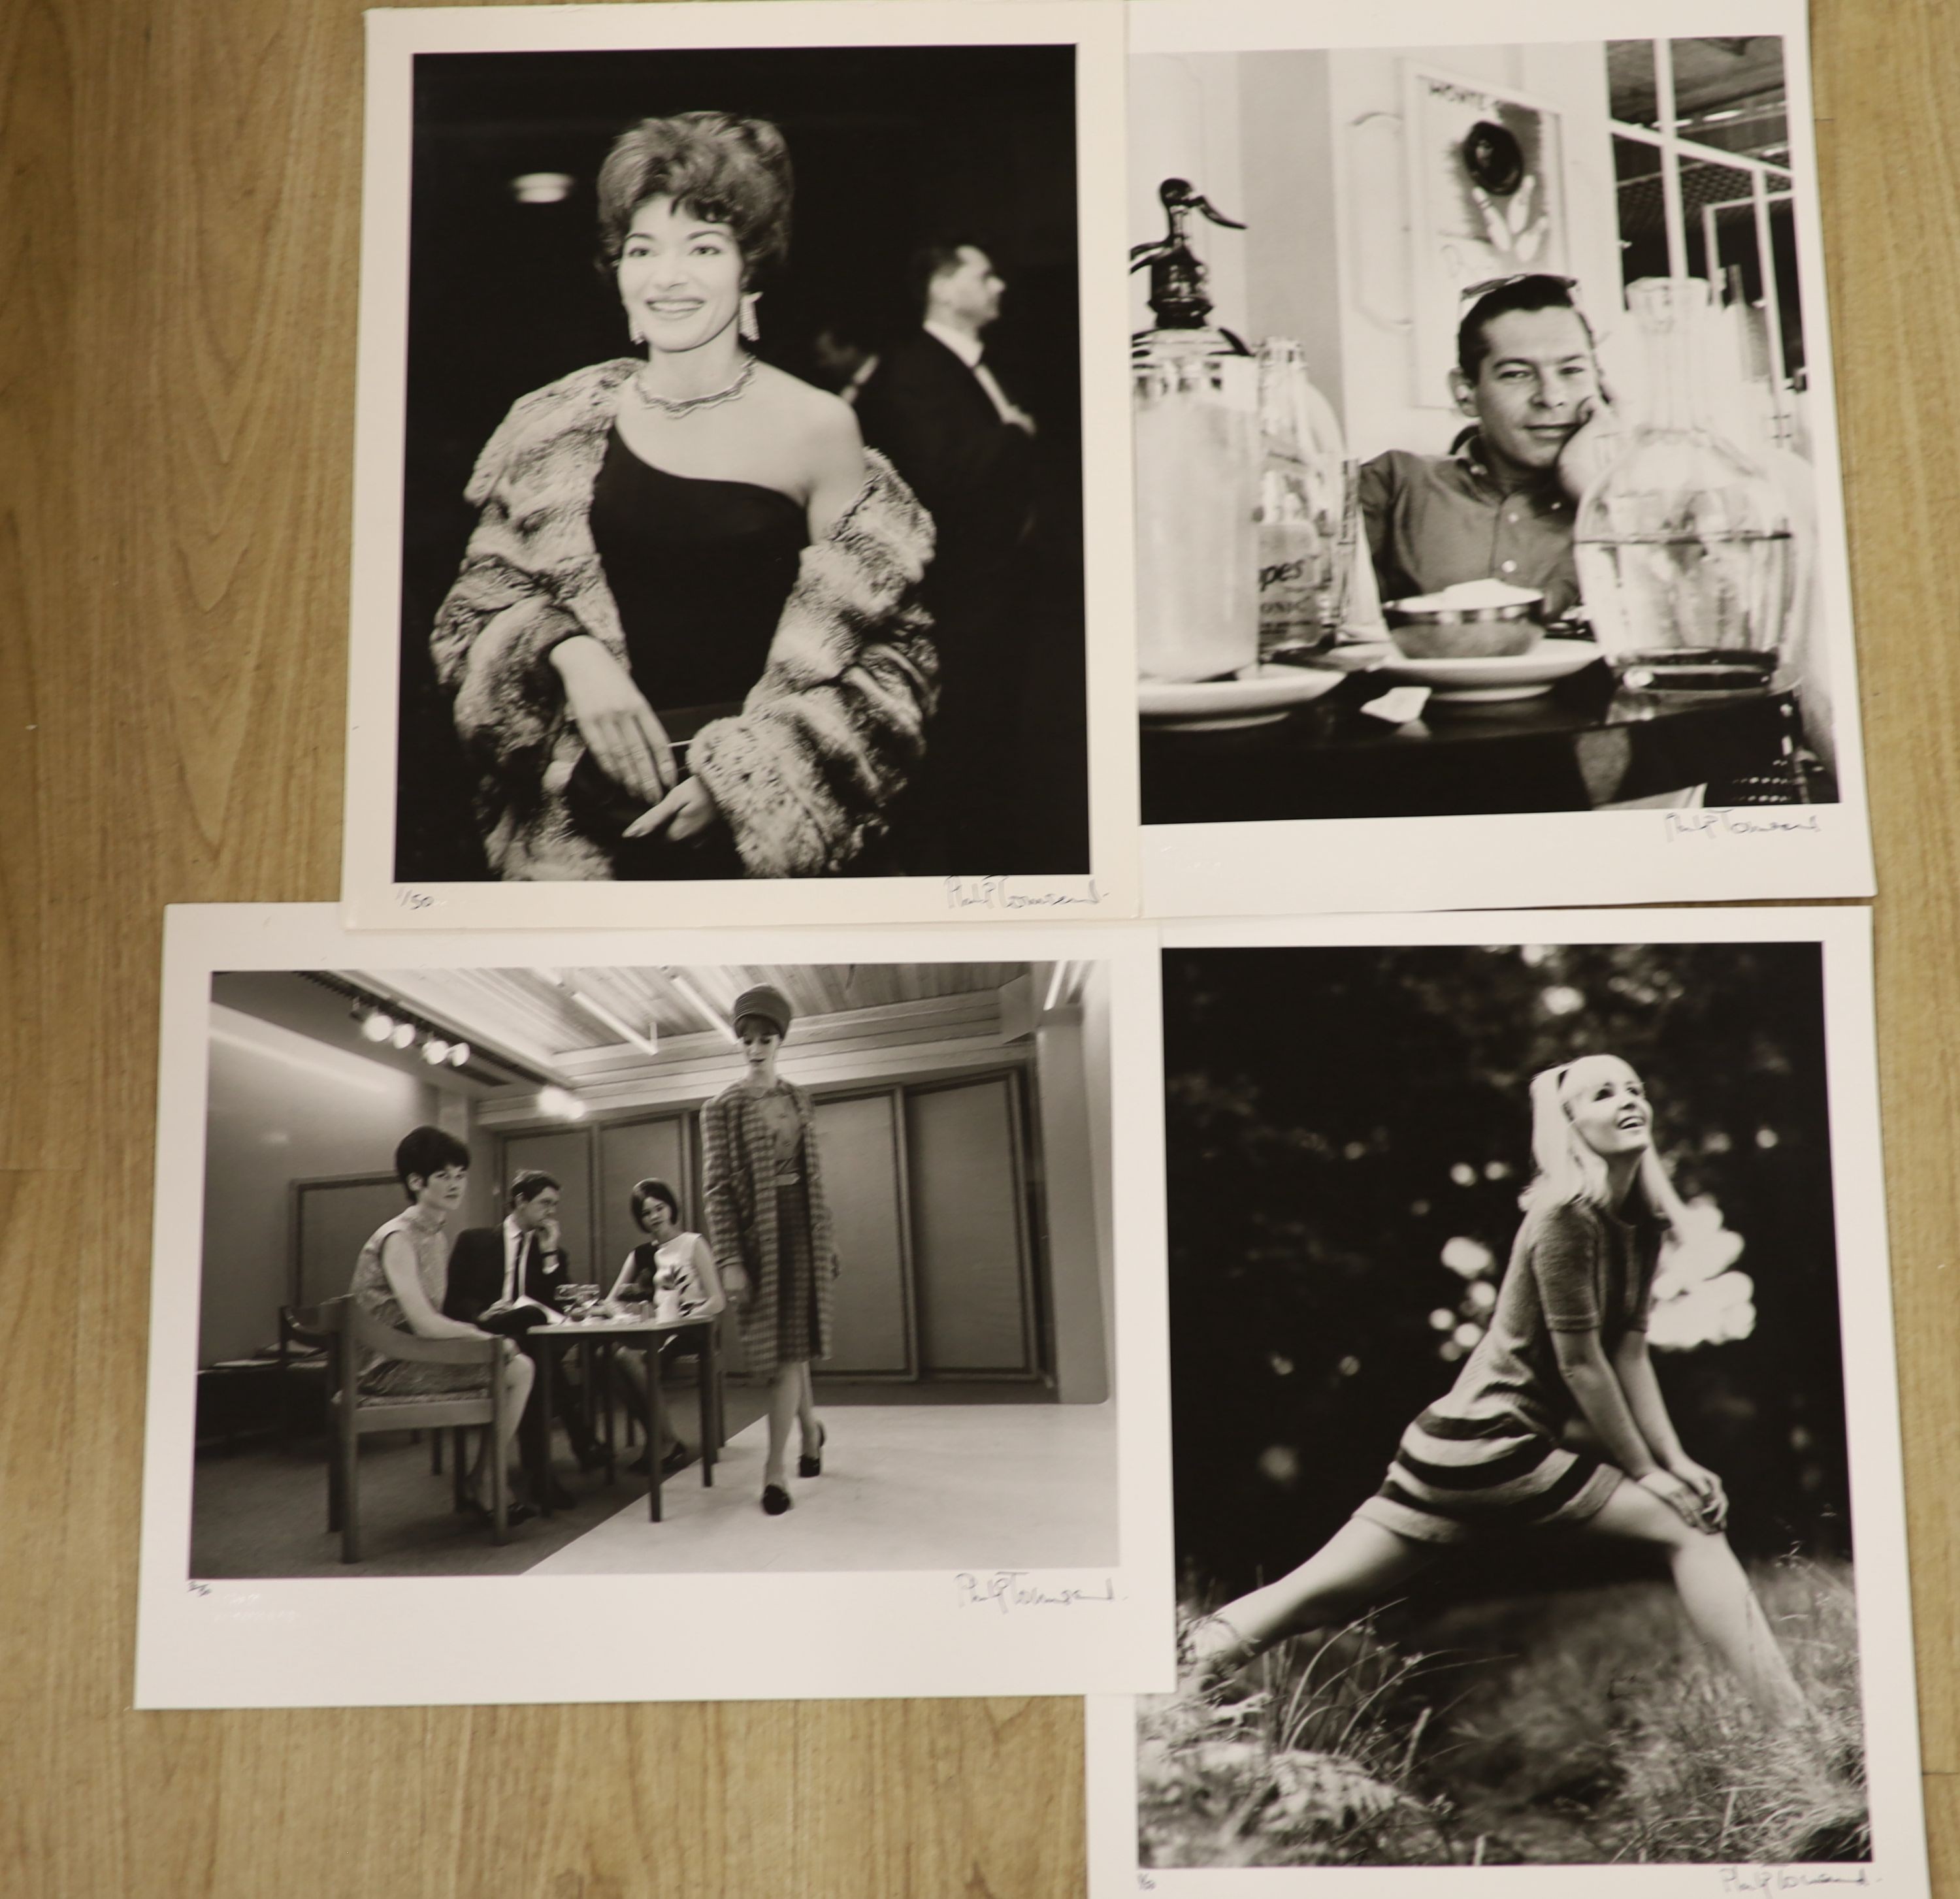 Philip Townsend (1940-2016), four silver gelatin prints signed and numbered by the photographer in black ink and blindstamped to the lower border, Maria Callas and fashion images, 50 x 40cm overall, unframed.